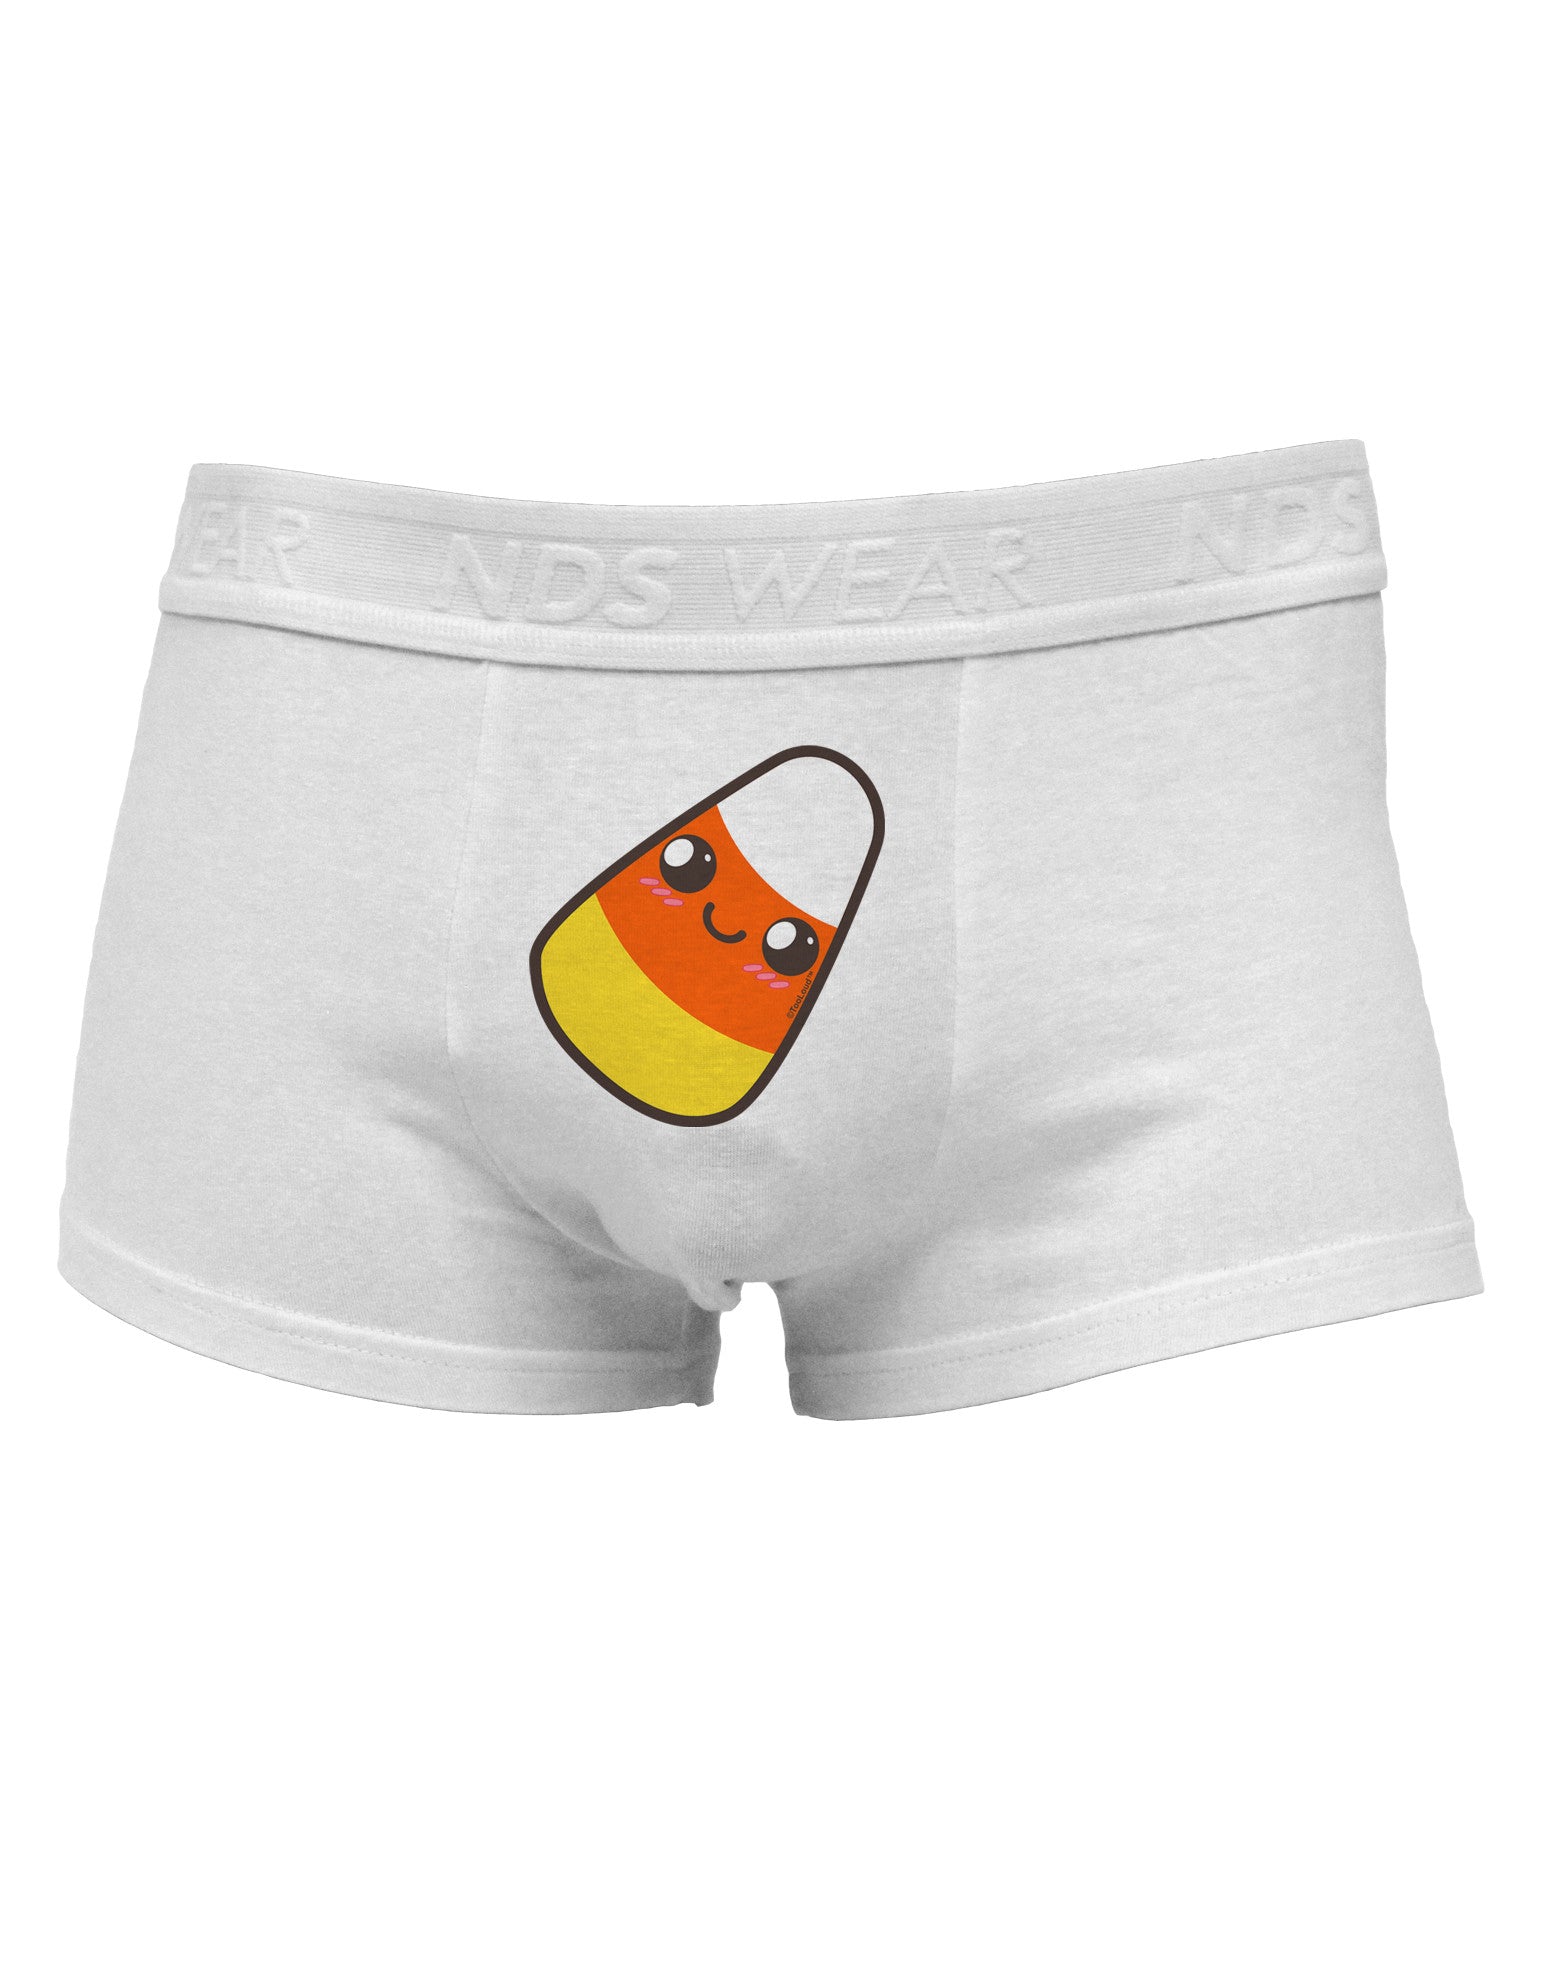 Cute Mother Candy Corn Family Halloween Mens Cotton Trunk Underwear